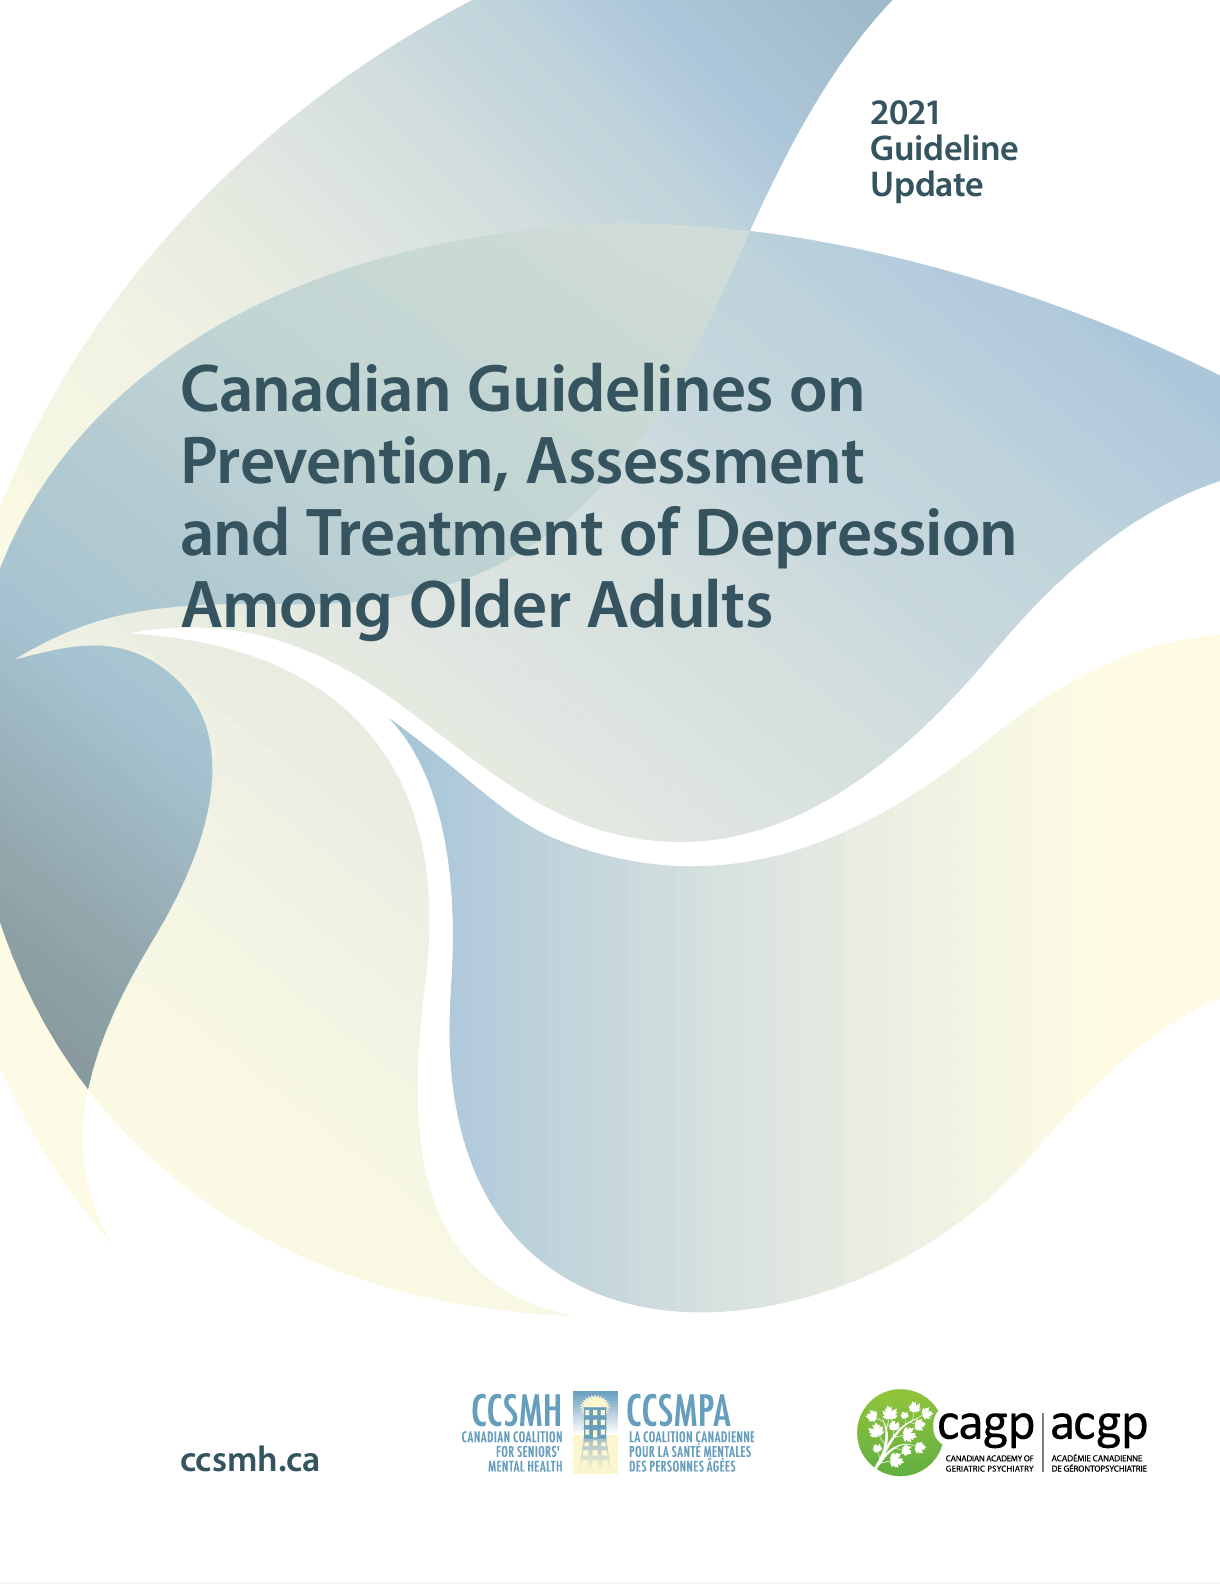 The cover of the booklet for the Canadian Guidelines on Depression which included wavy shapes in a pastel colour.